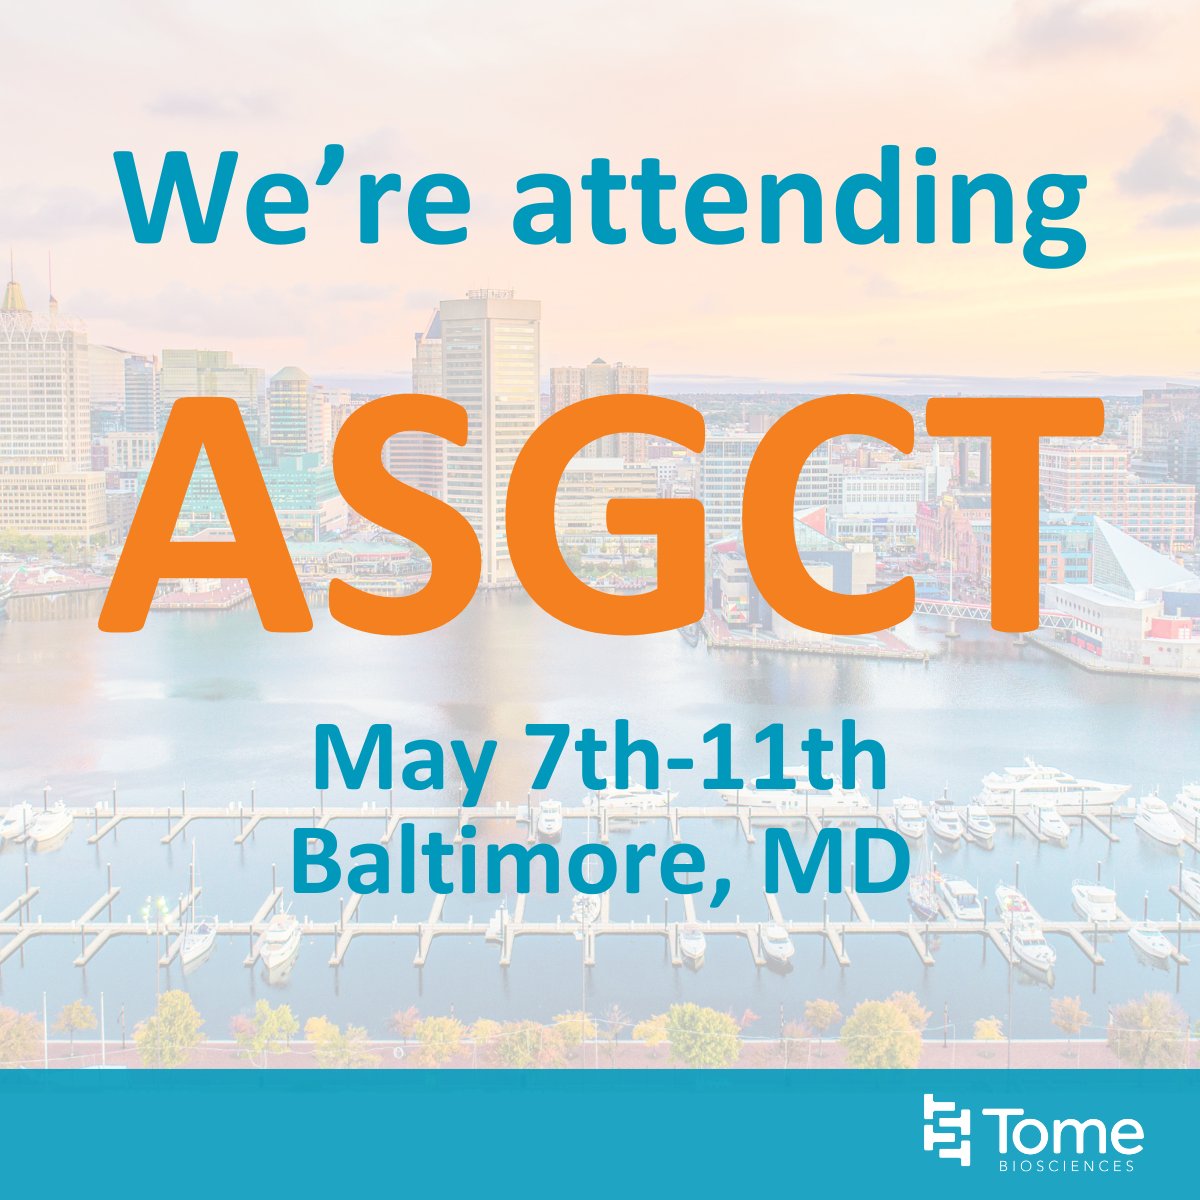 The Tome team is headed to @asgctherapy’s #ASGCT2024 in Baltimore, May 7-11! We’re looking forward to a week of learning the latest cell and gene insights and supporting our fellow colleagues’ presentations on May 9-10. Learn more about the abstracts: bit.ly/3y7ocdn